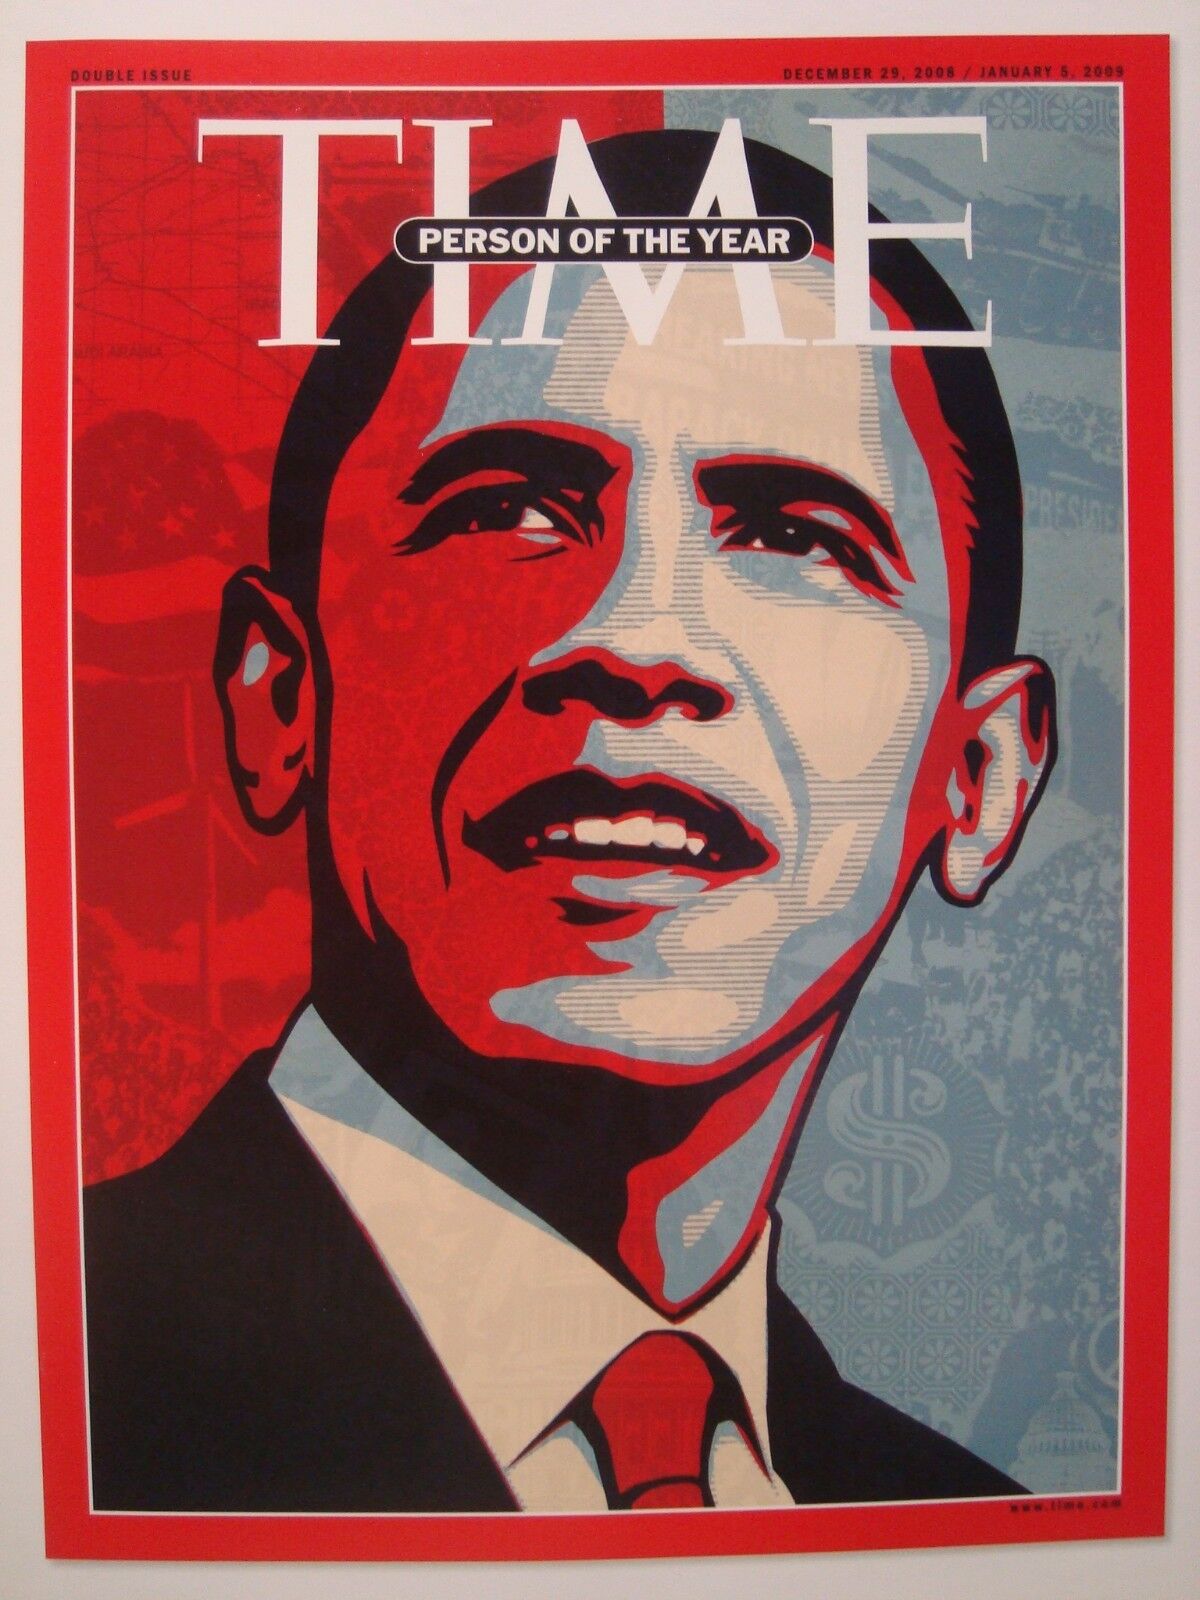 BARACK OBAMA PERSON OF THE YEAR TIME MAGAZINE COVER PAGE PHOTO FROM TIME BOOK